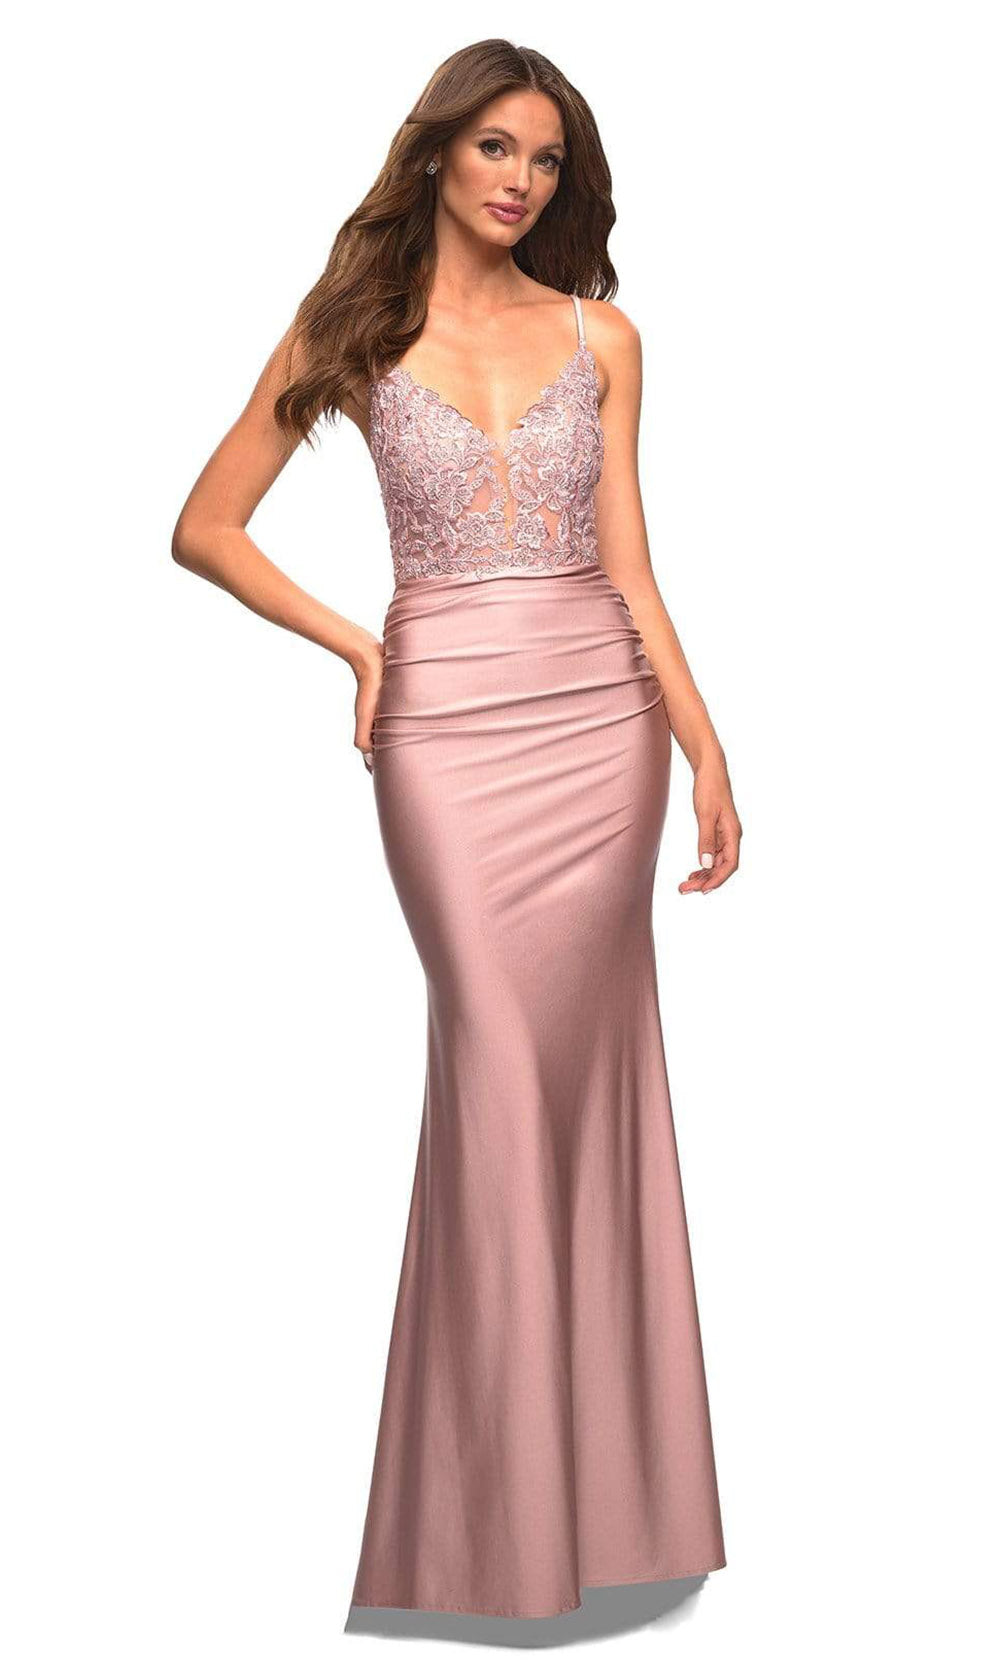 La Femme - 30466 Strappy Lace Bodice Gown In Pink